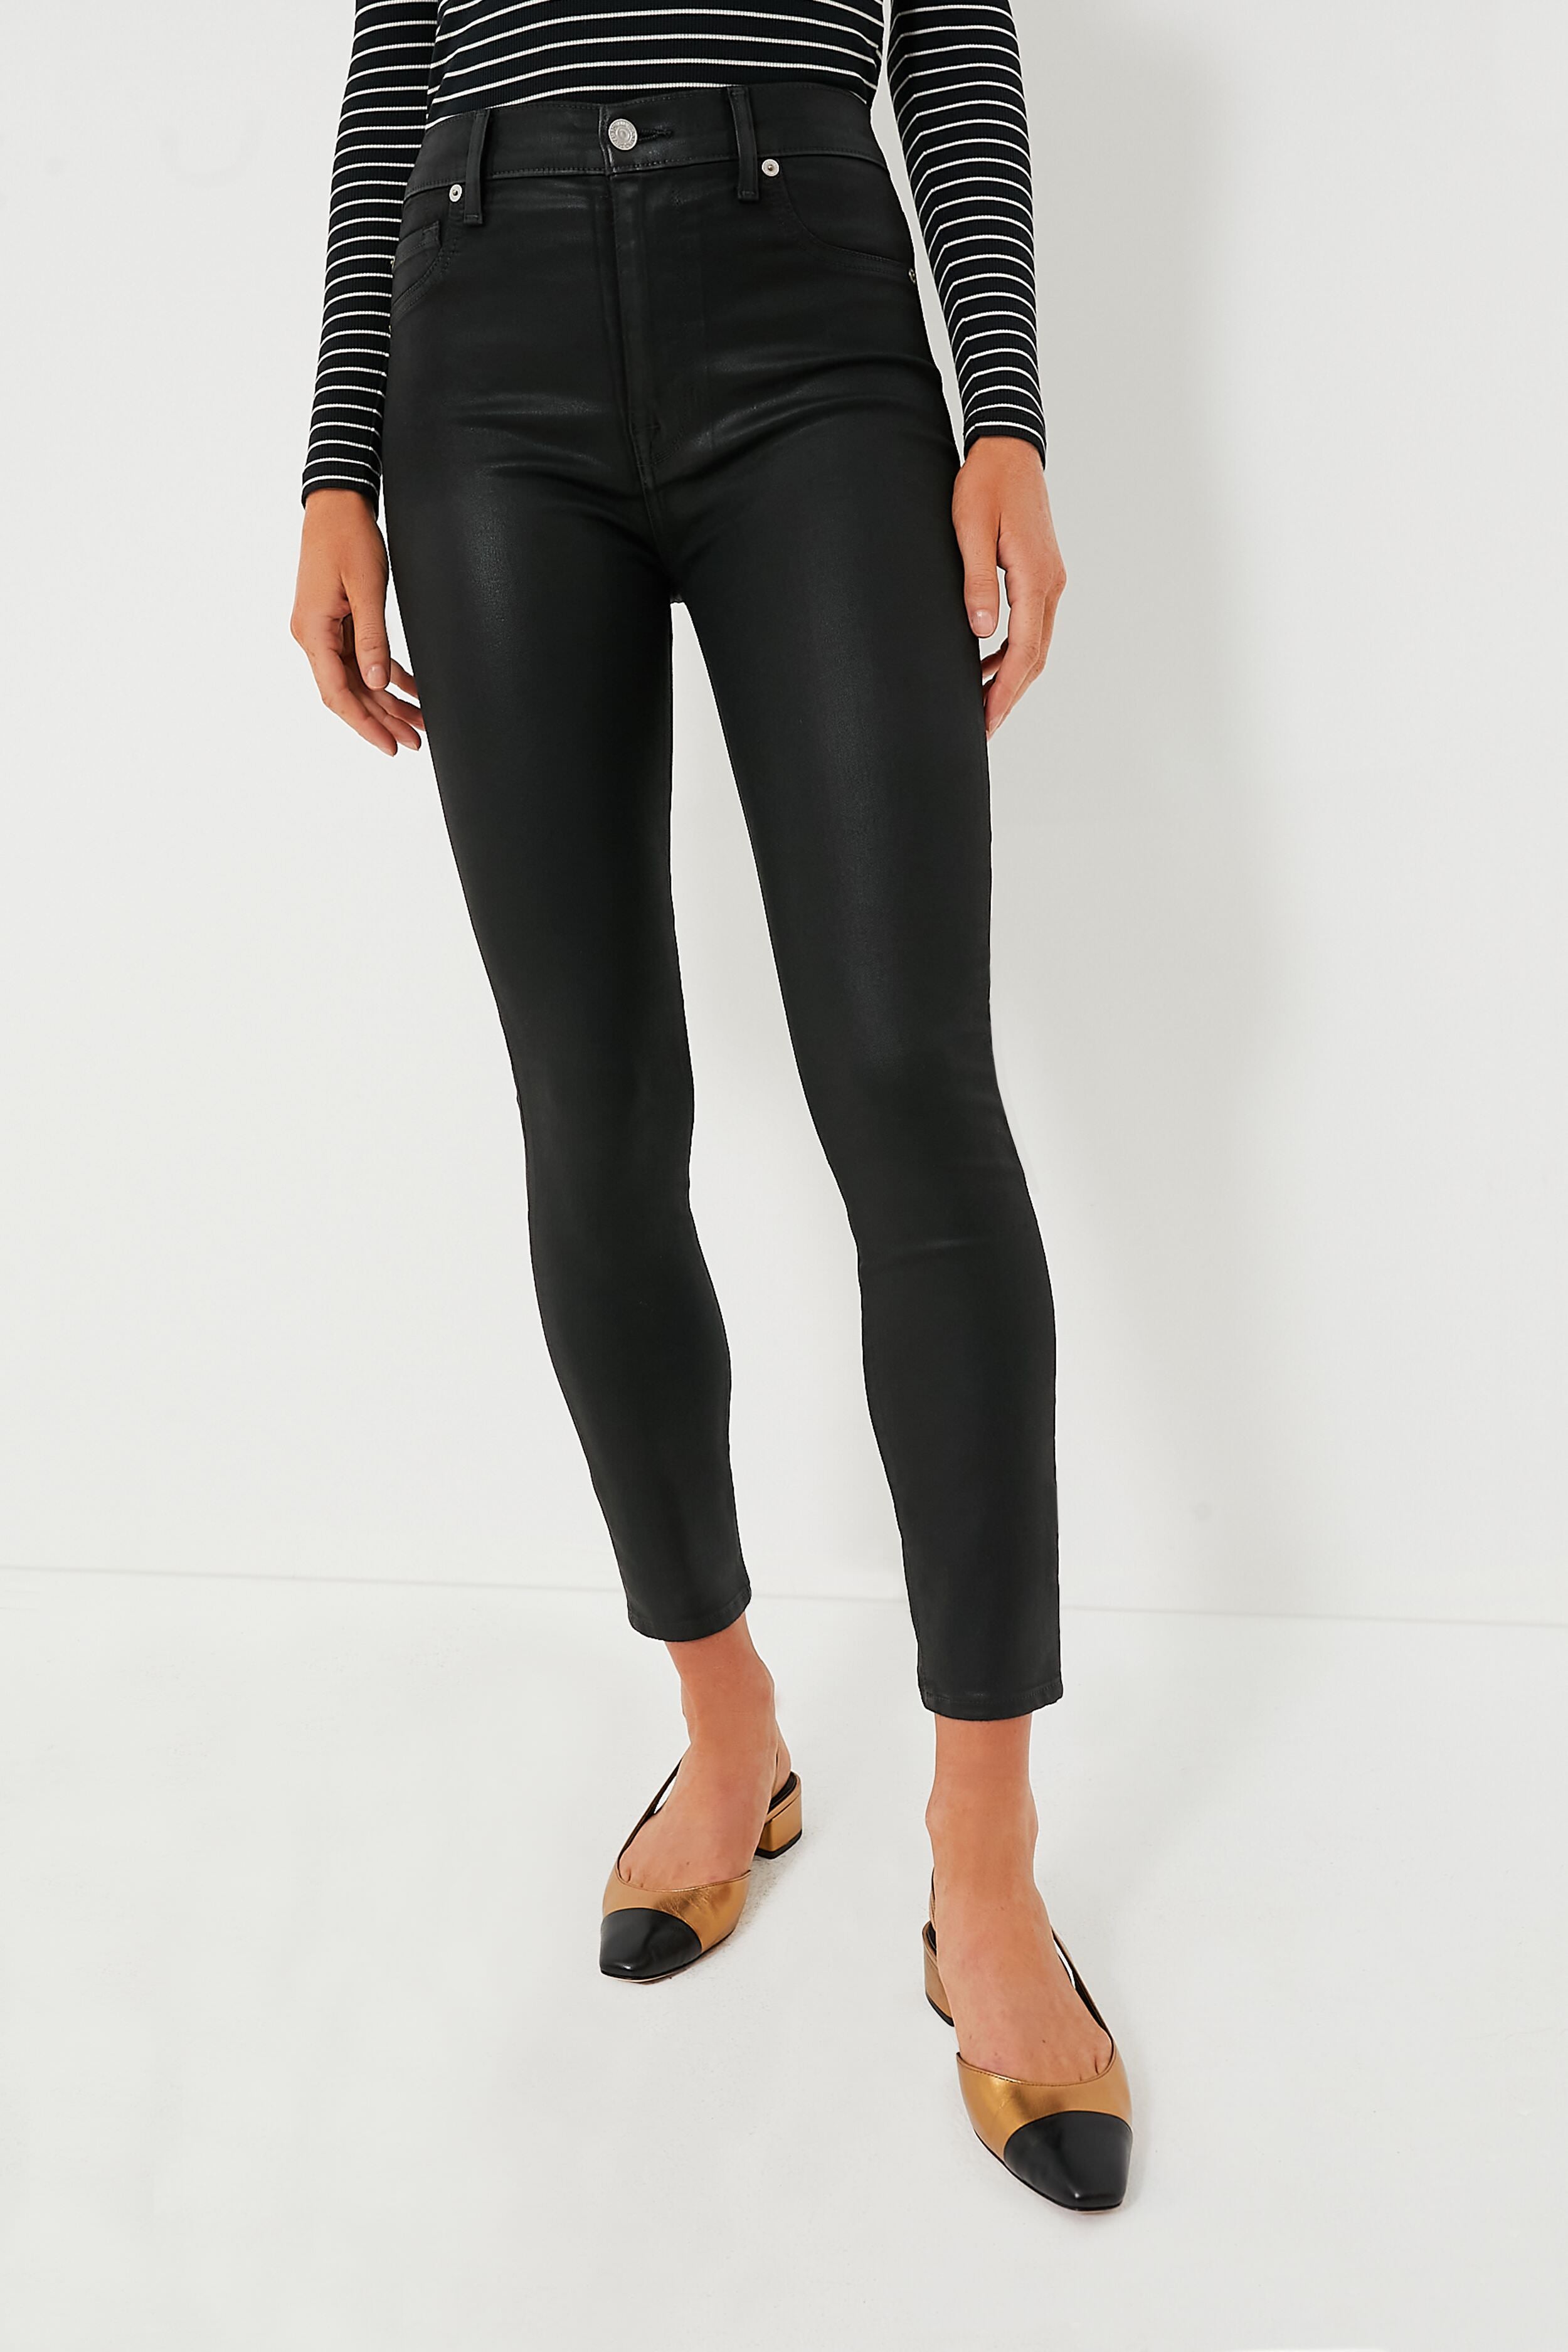 Max Studio Women's High Waisted Faux Leather Leggings, Black, Large :  : Clothing, Shoes & Accessories